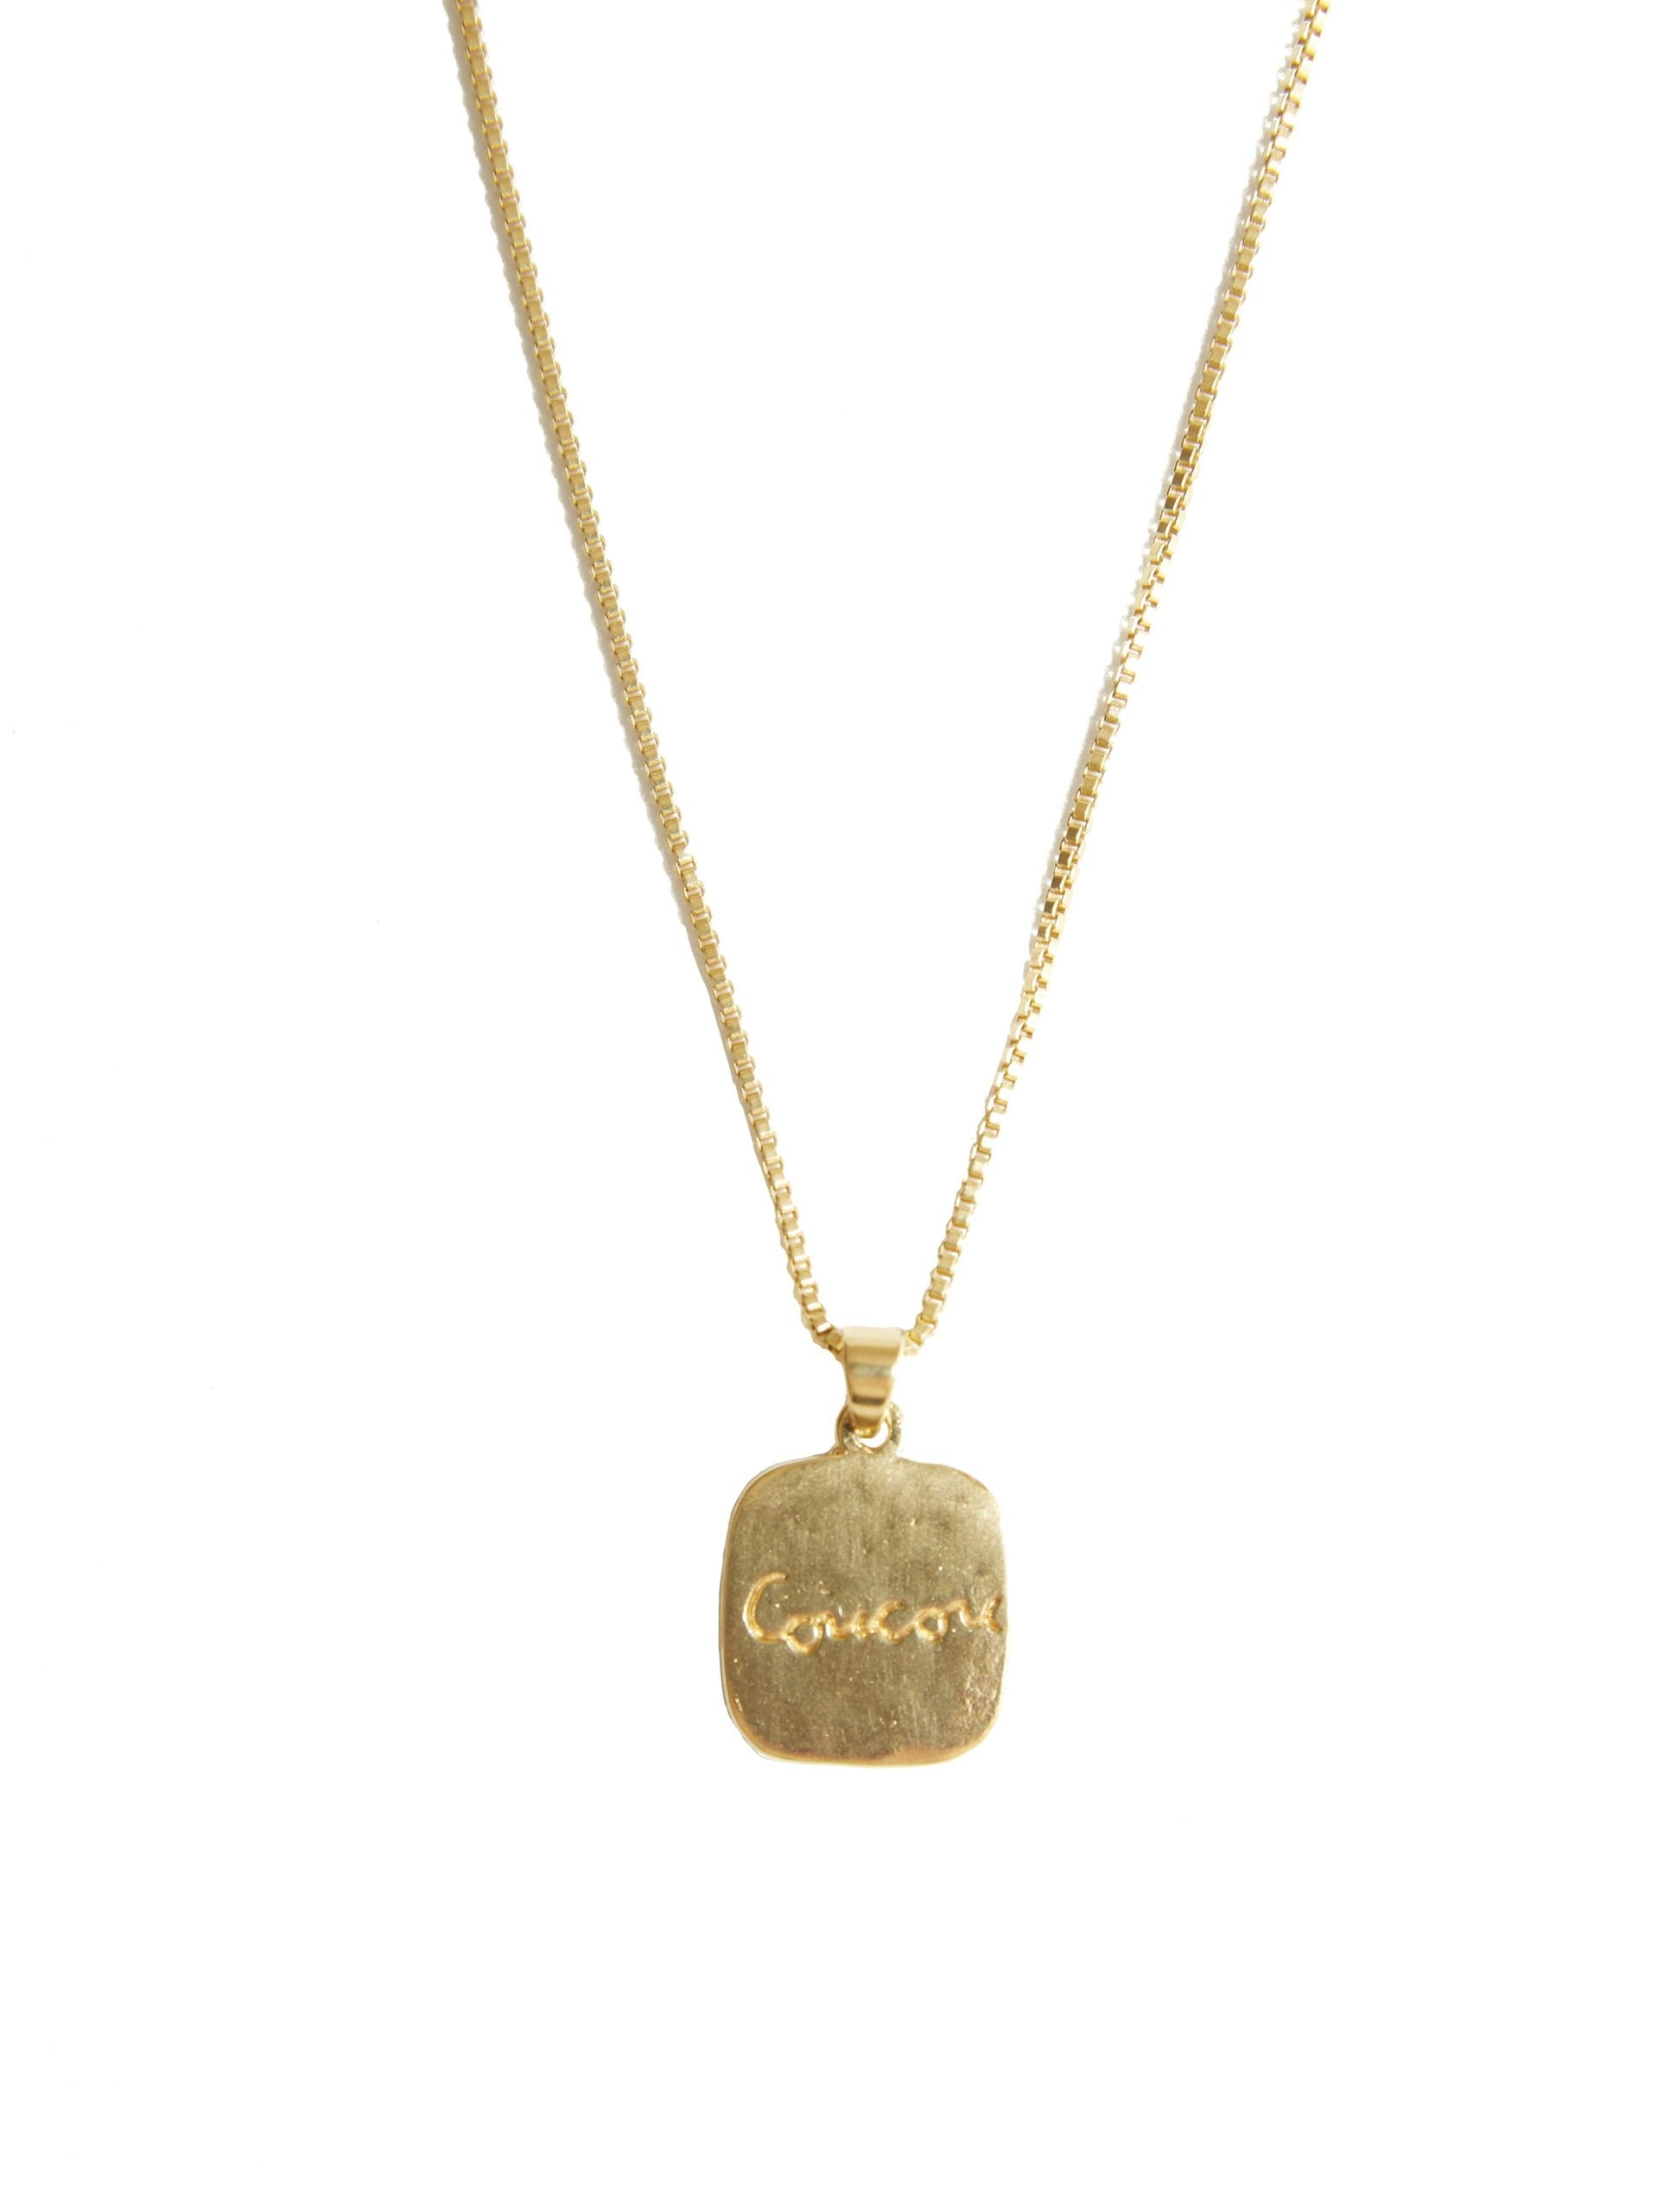 Elodie Necklace Gold